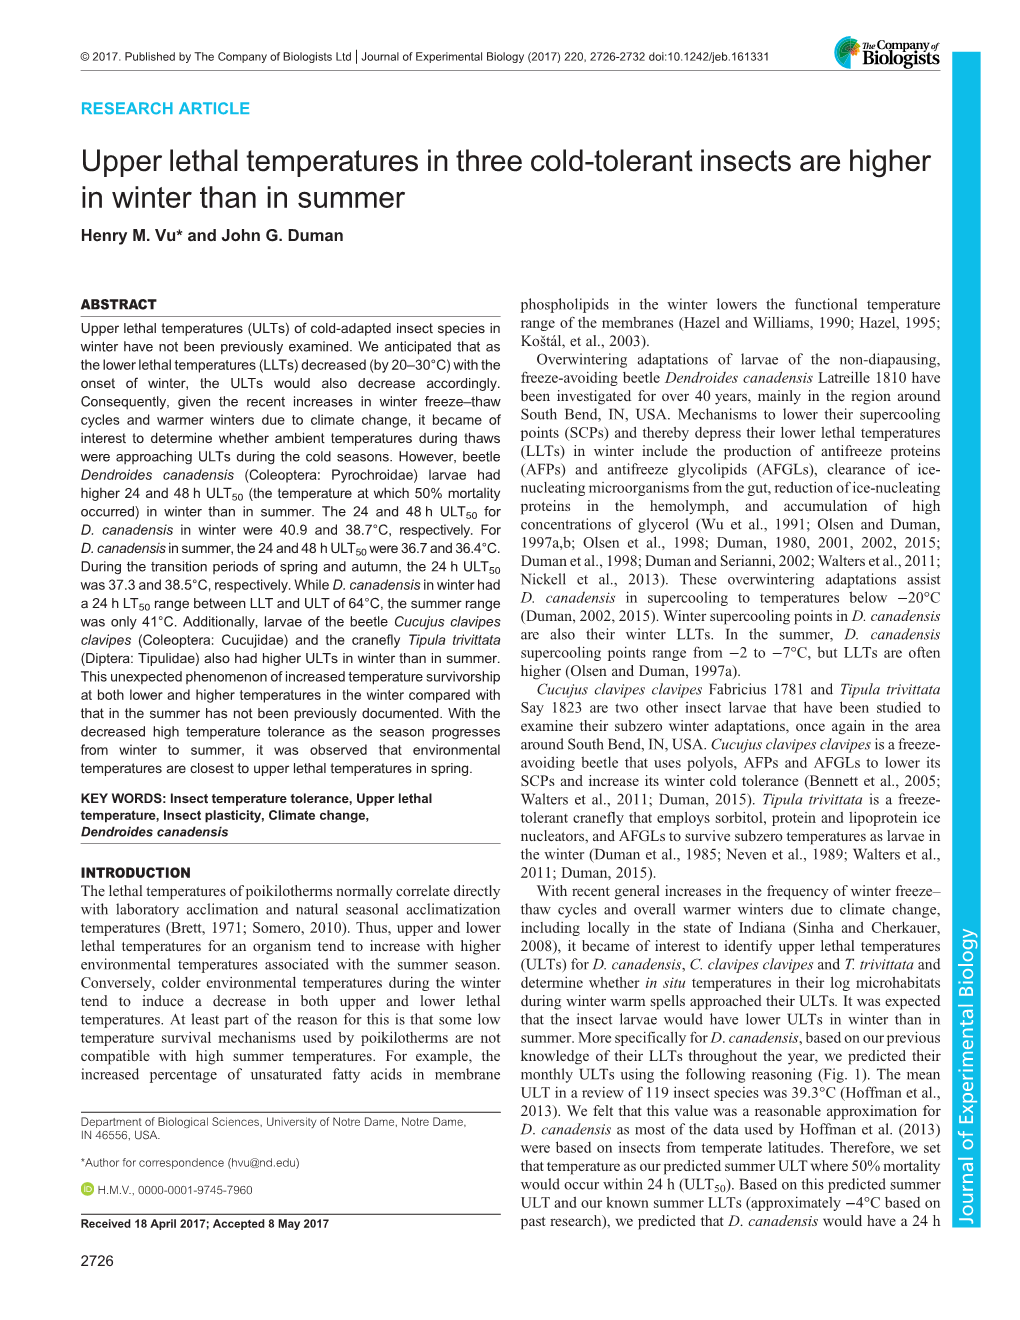 Upper Lethal Temperatures in Three Cold-Tolerant Insects Are Higher in Winter Than in Summer Henry M